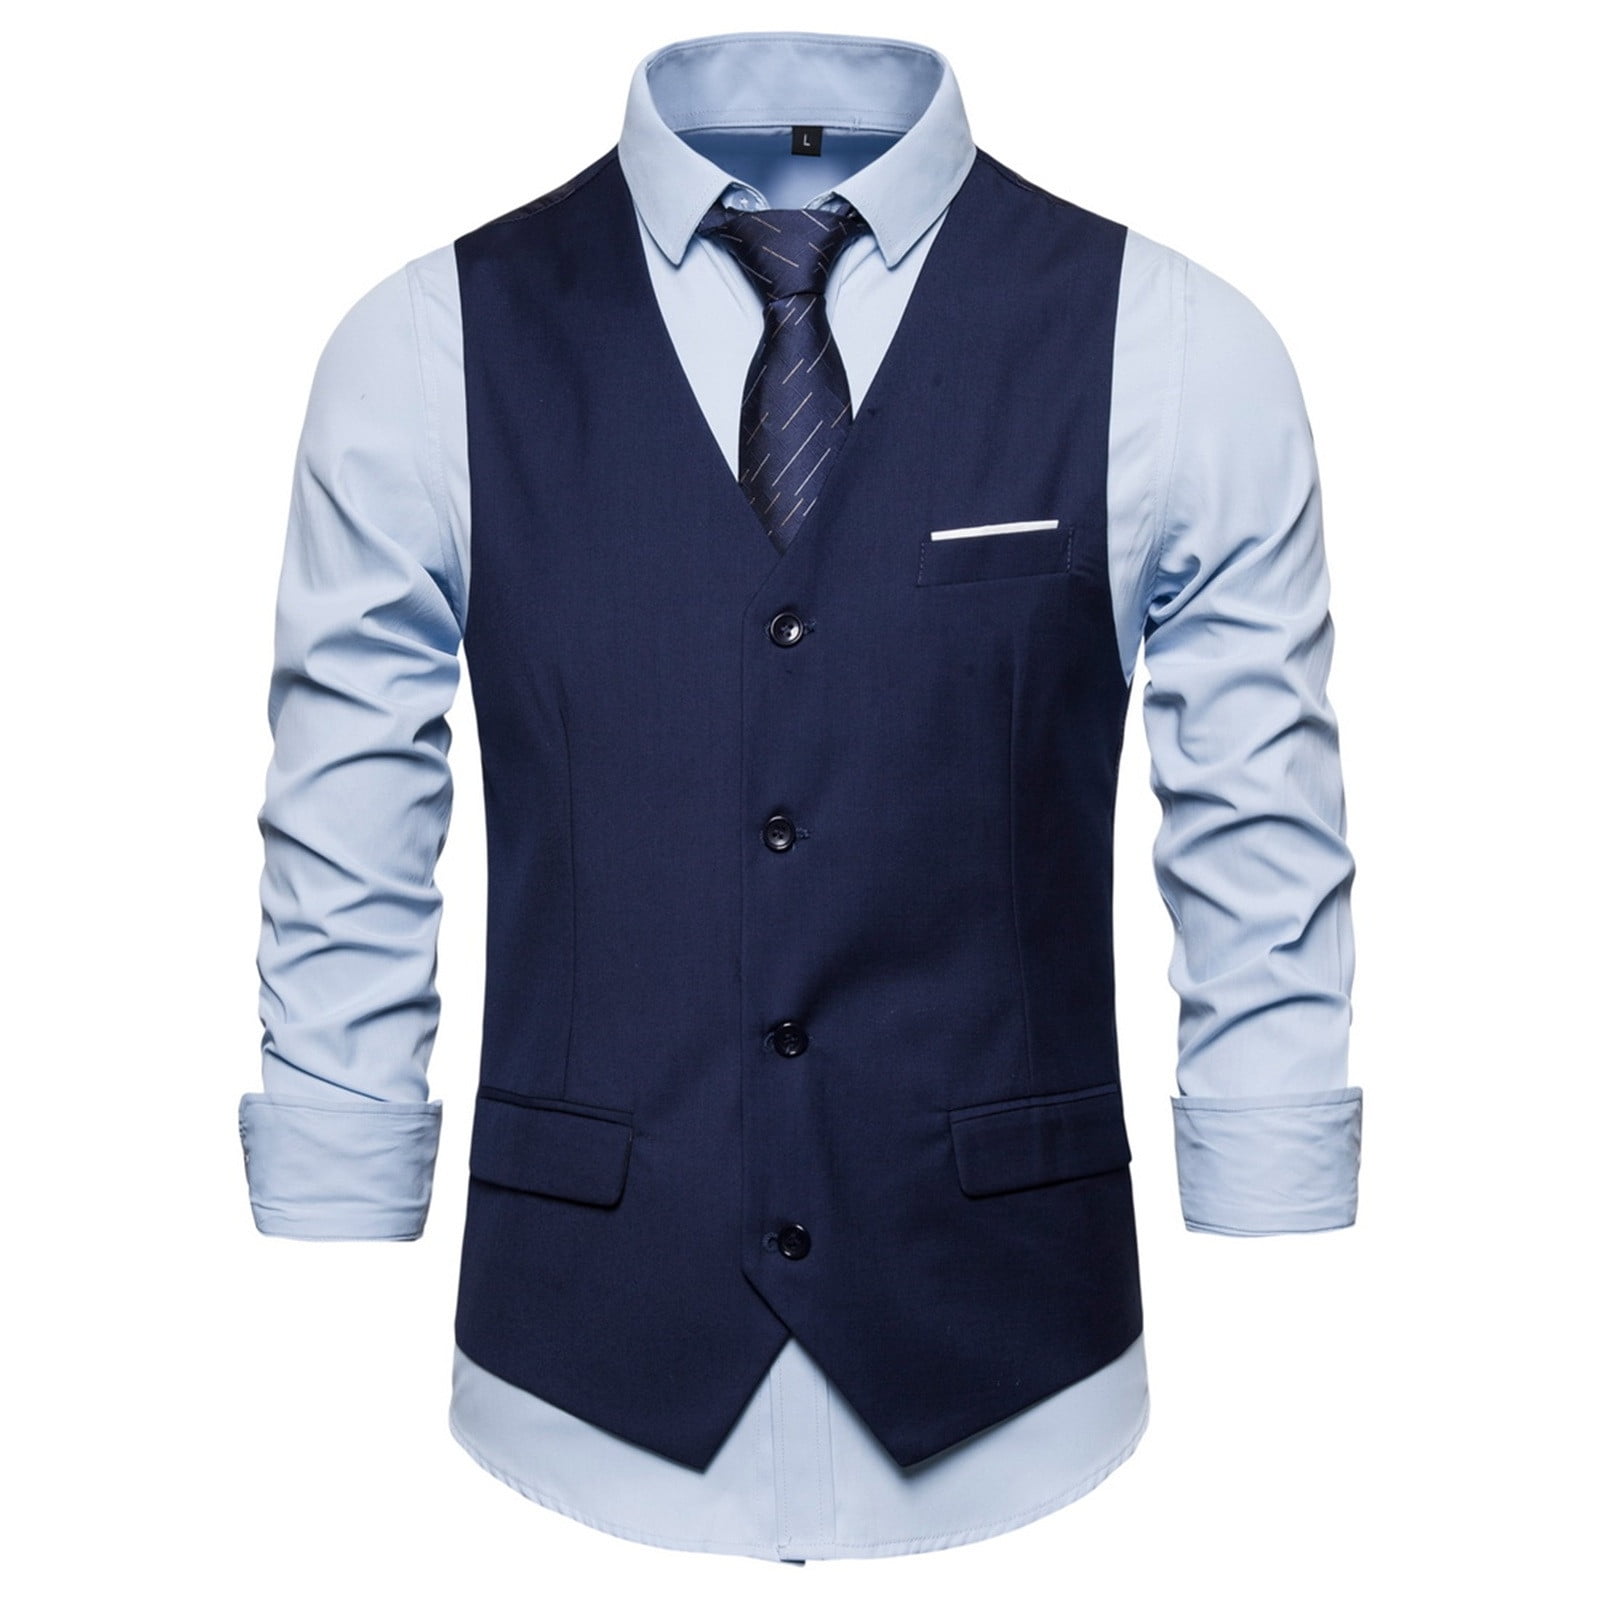 BELLZELY Blazers for Men Big Spring Vest Men\'s Clearance Suit Bussiness Spring Tuxedo Tall Waistcoat Top Jacket Coat and Formal